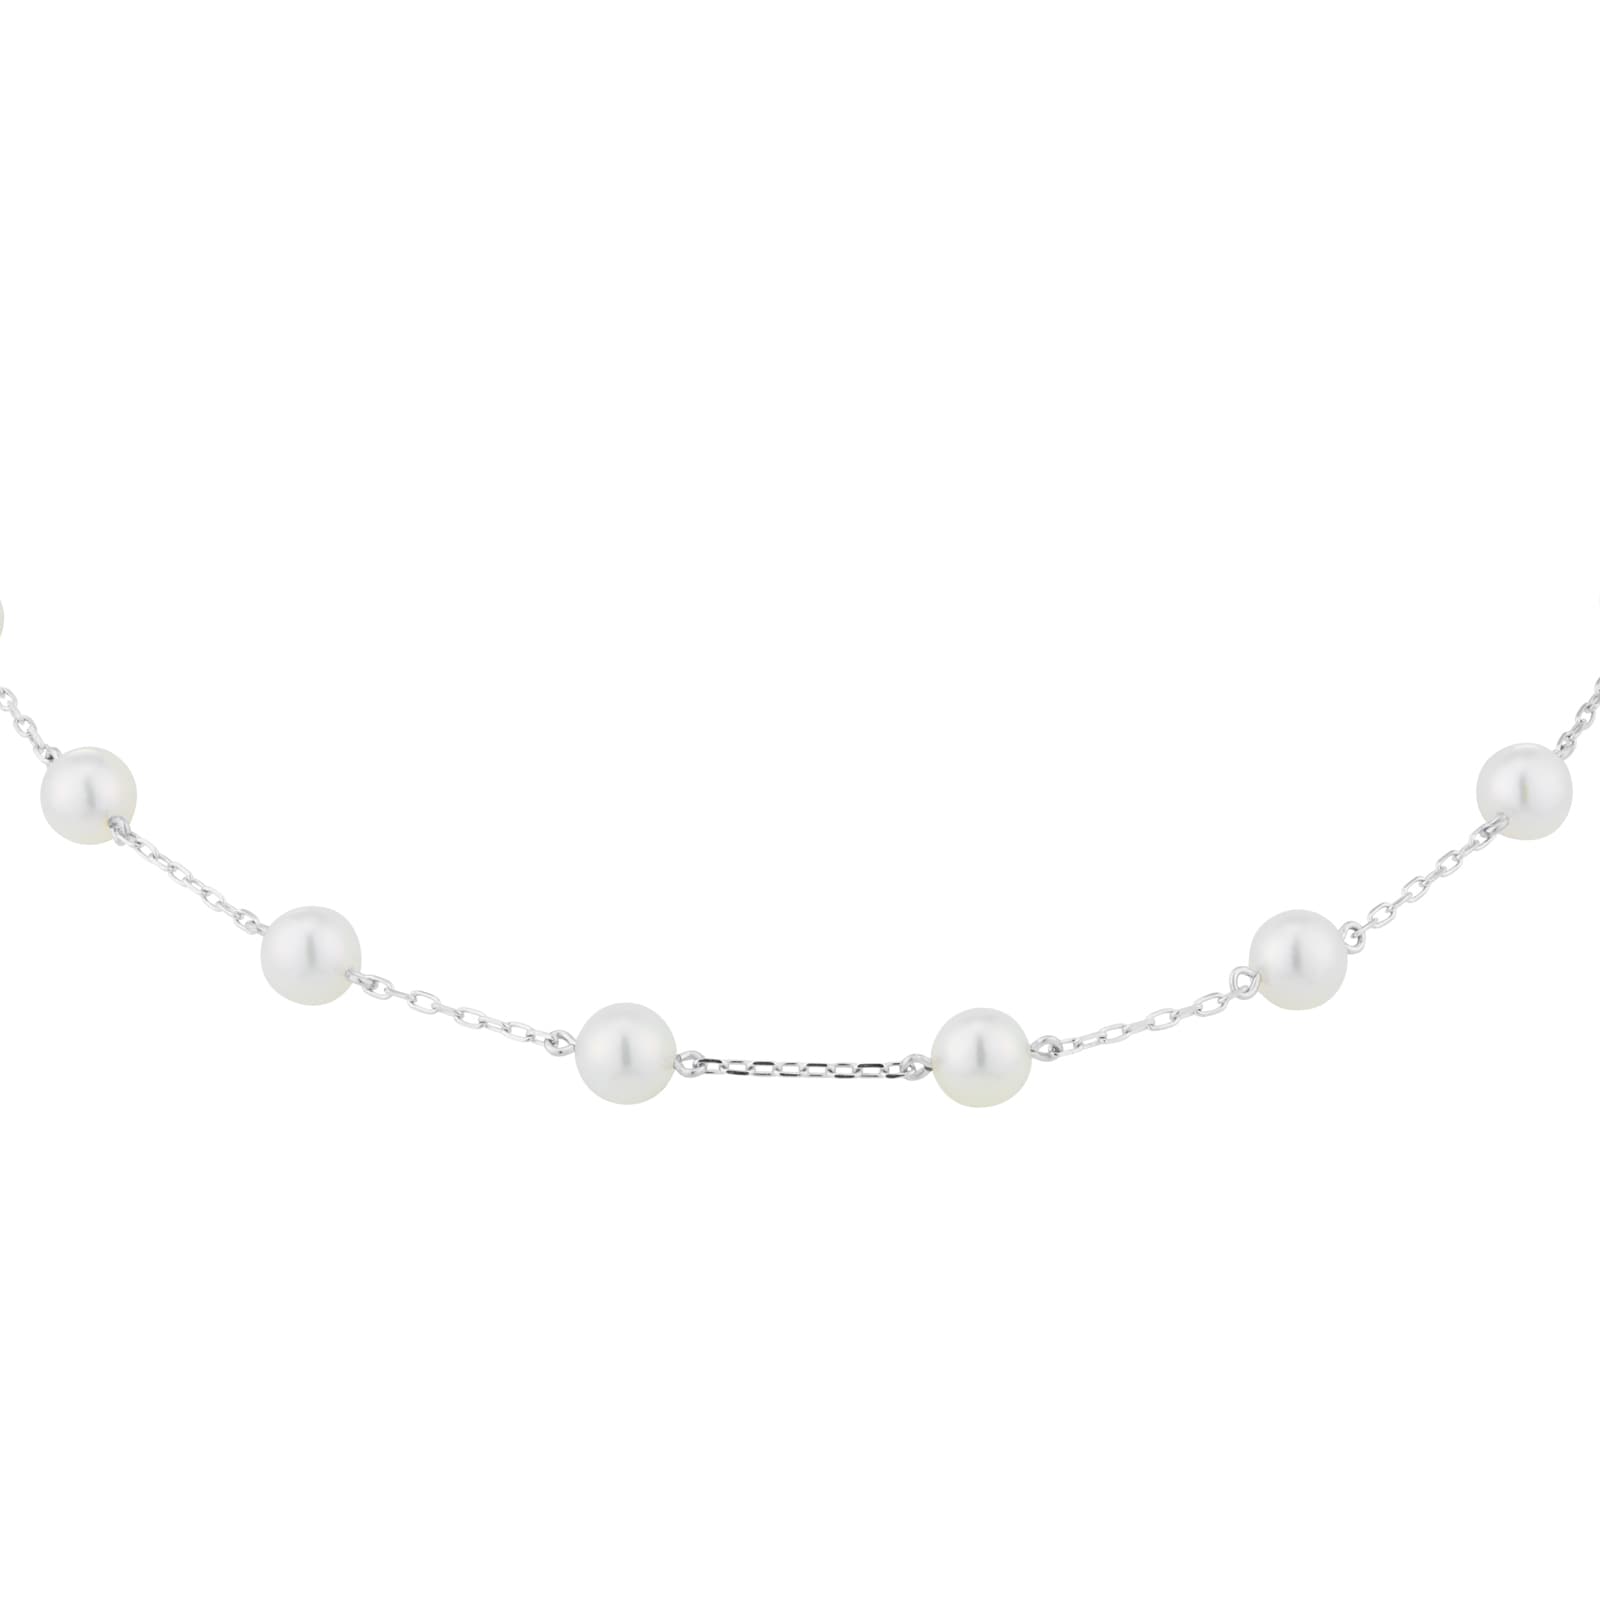 7mm Akoya Pearl Necklace - AA Quality - Pearl & Clasp